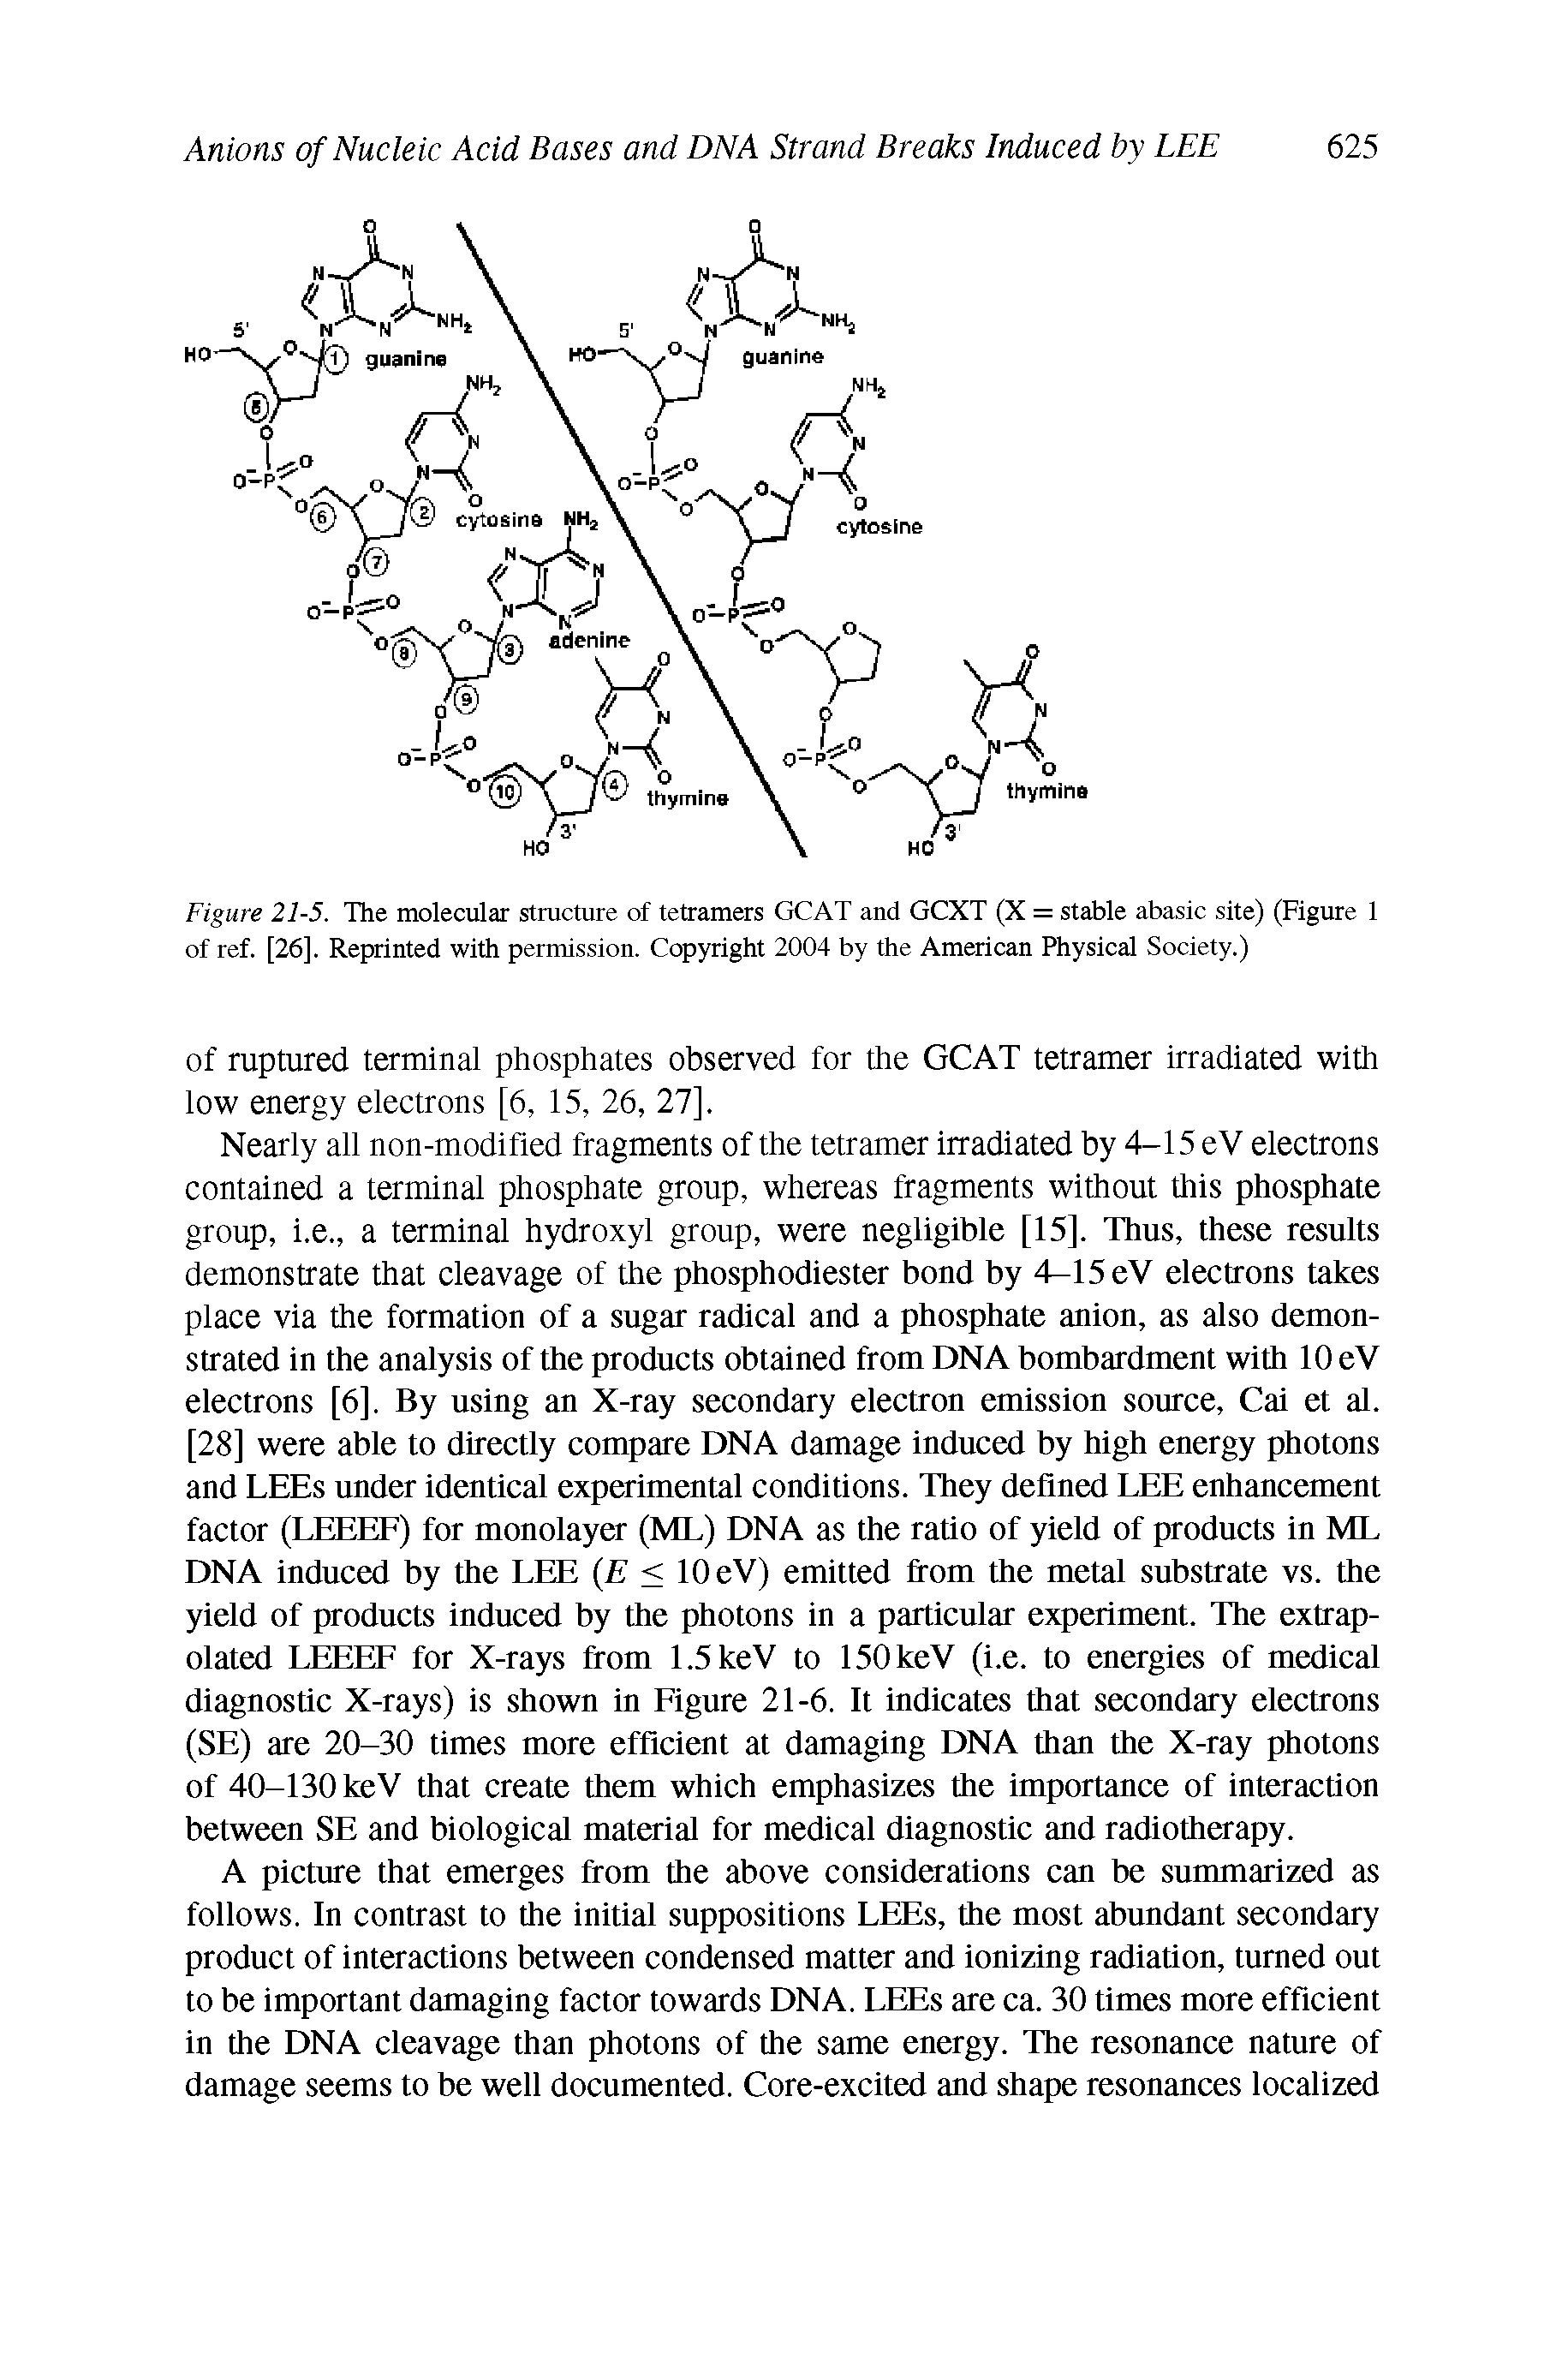 Figure 21-5. The molecular structure of tetramers GCAT and GCXT (X = stable abasic site) (Figure 1 of ref. [26]. Reprinted with permission. Copyright 2004 by the American Physical Society.)...